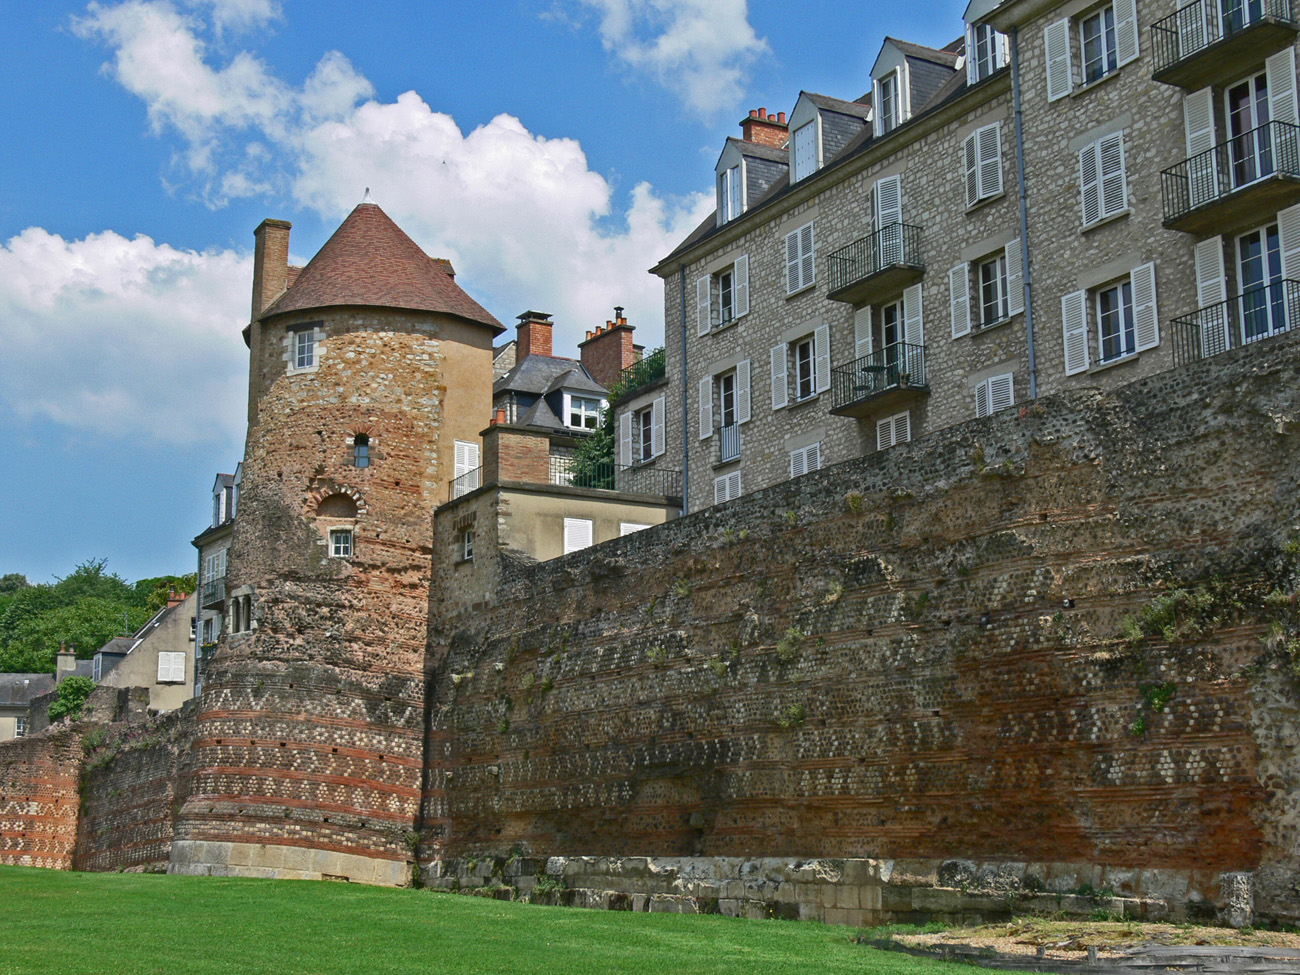 A Great wall of 50 Towers once flanked the city of Maracelles France